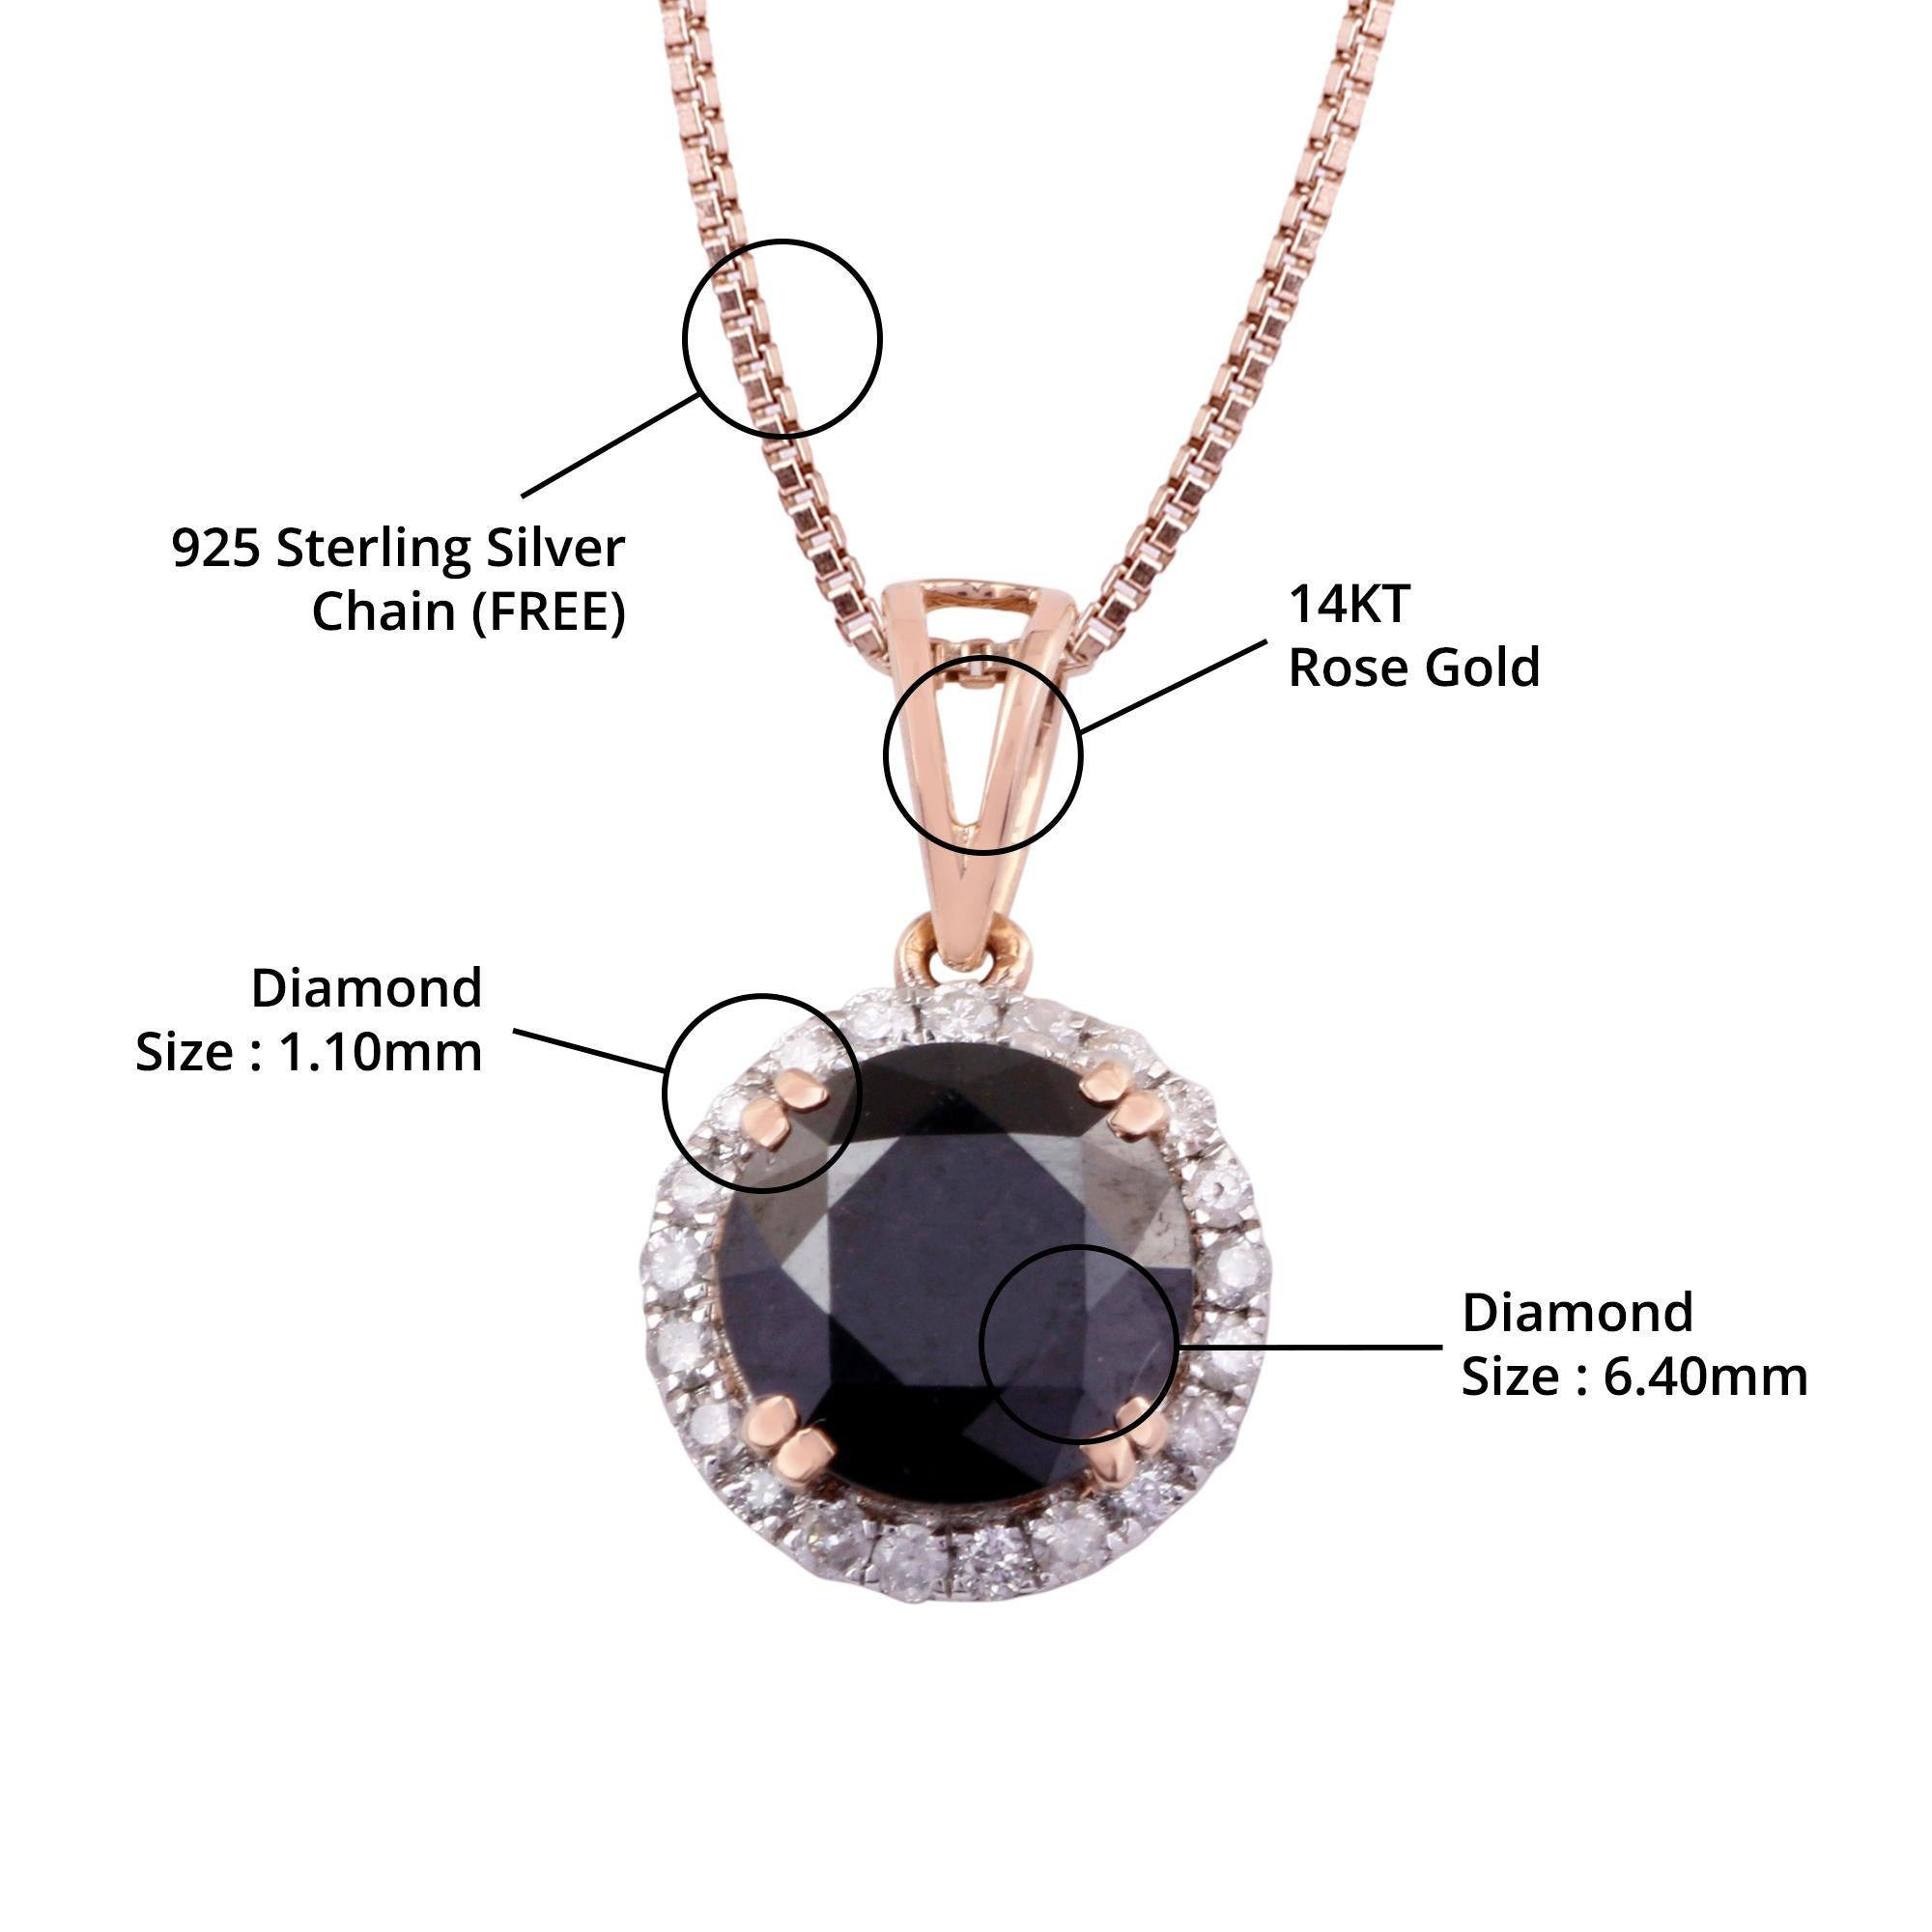 Item details:-

✦ SKU:- JPD00164RRR

✦ Material :- Gold

✦ Metal Purity : 14K Rose Gold

✦ Gemstone Specification:- 
✧ Clear Diamond Round (l1/H1) - 1.10mm - 21 Pcs
✧ Real Black Diamond - 6.40 mm - 1 Pc


✦ Approx. Diamond Carat Weight : 0.122